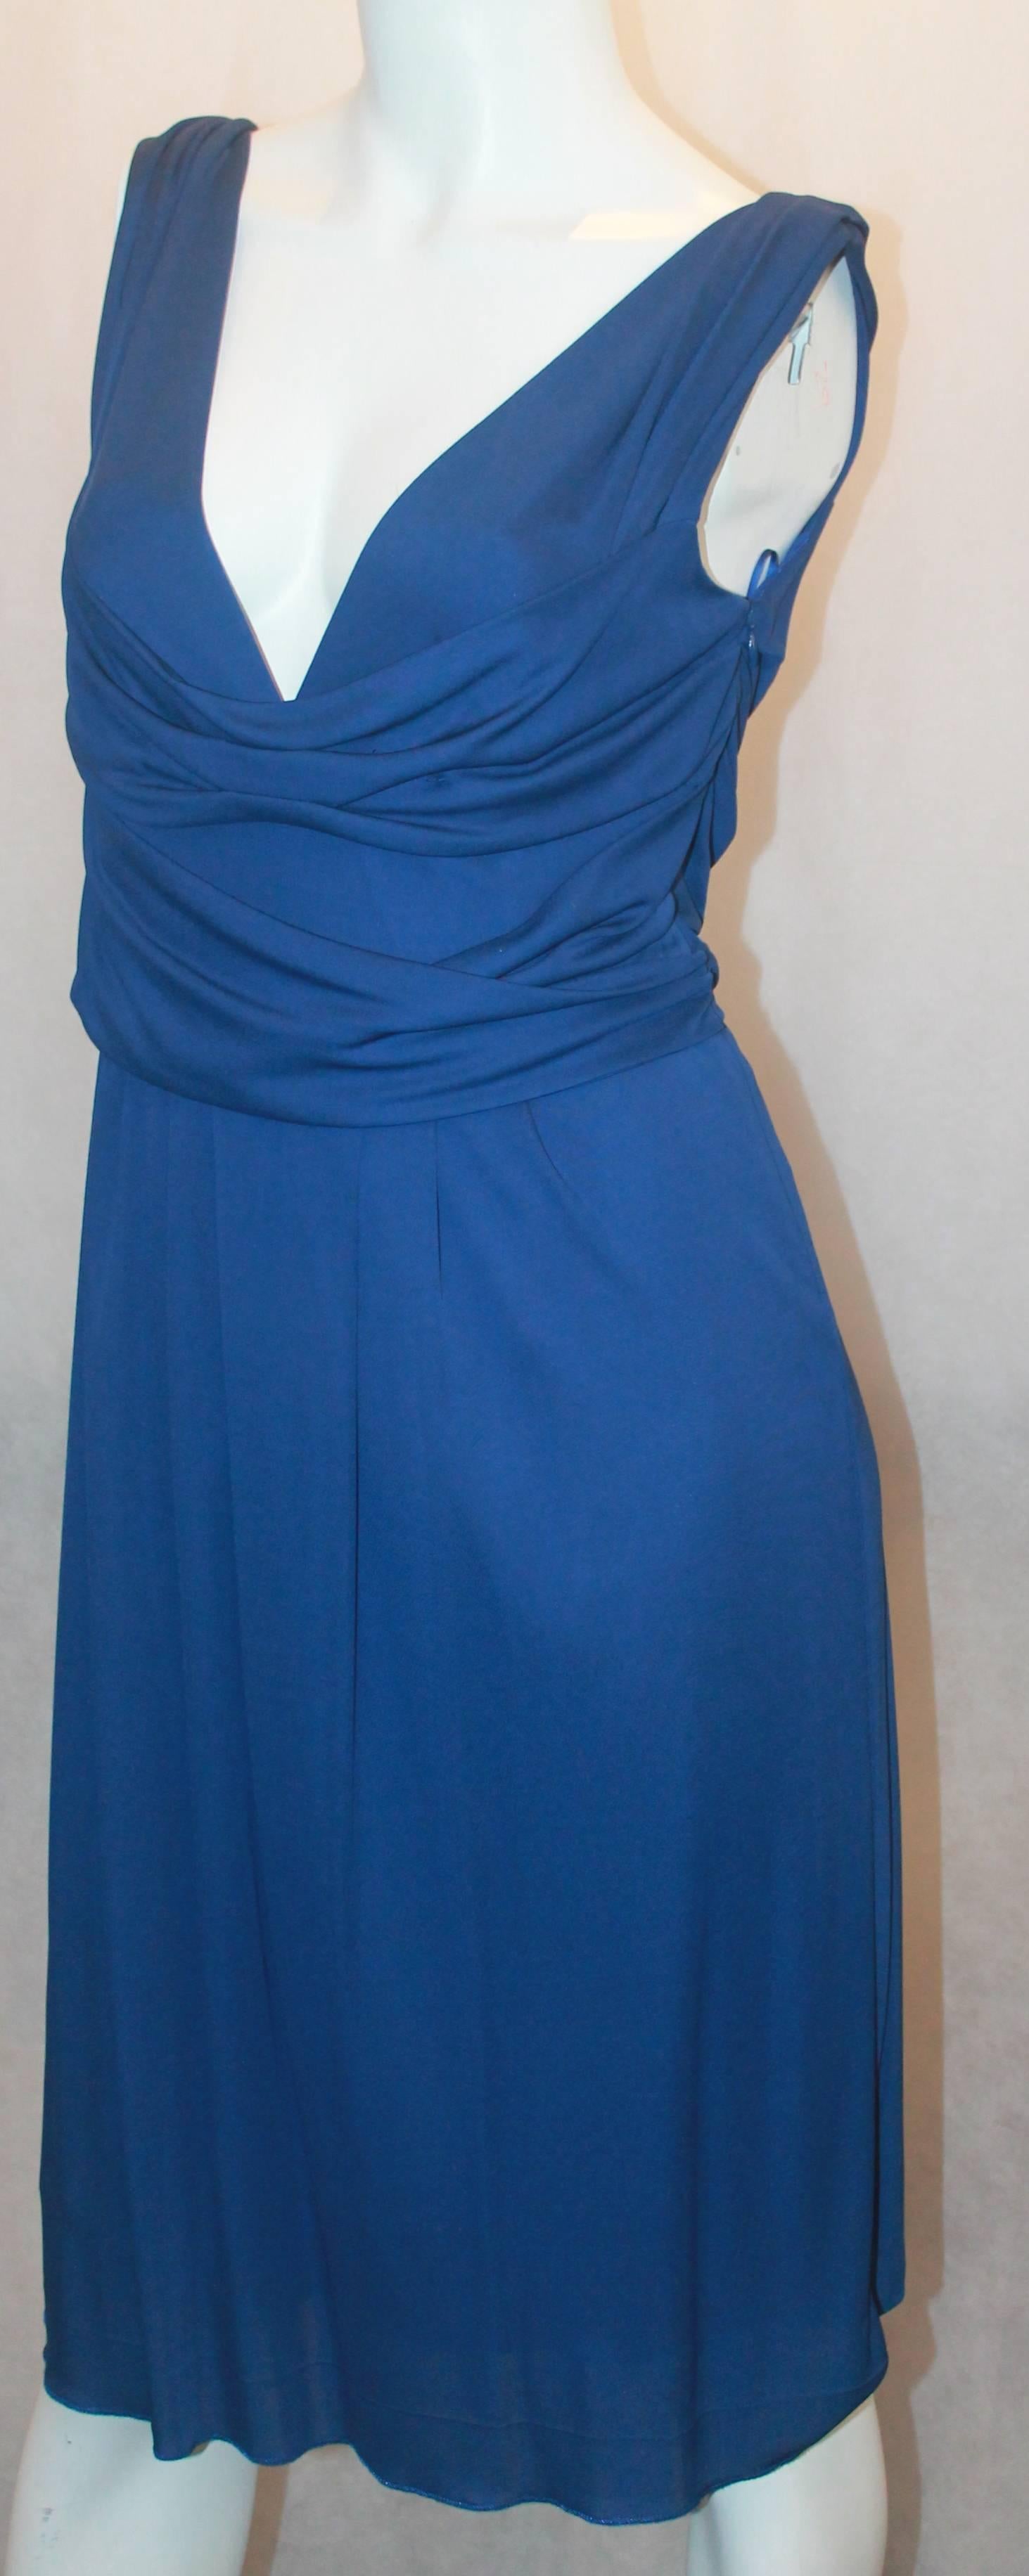 Moschino Blue Matte Sleeveless Jersey Dress - 8.  This lovely dress is in excellent condition.  It features a feminine blue matte jersey material, a knee length hem, a deep v neckline, and a waistband.  It is a simply beautiful